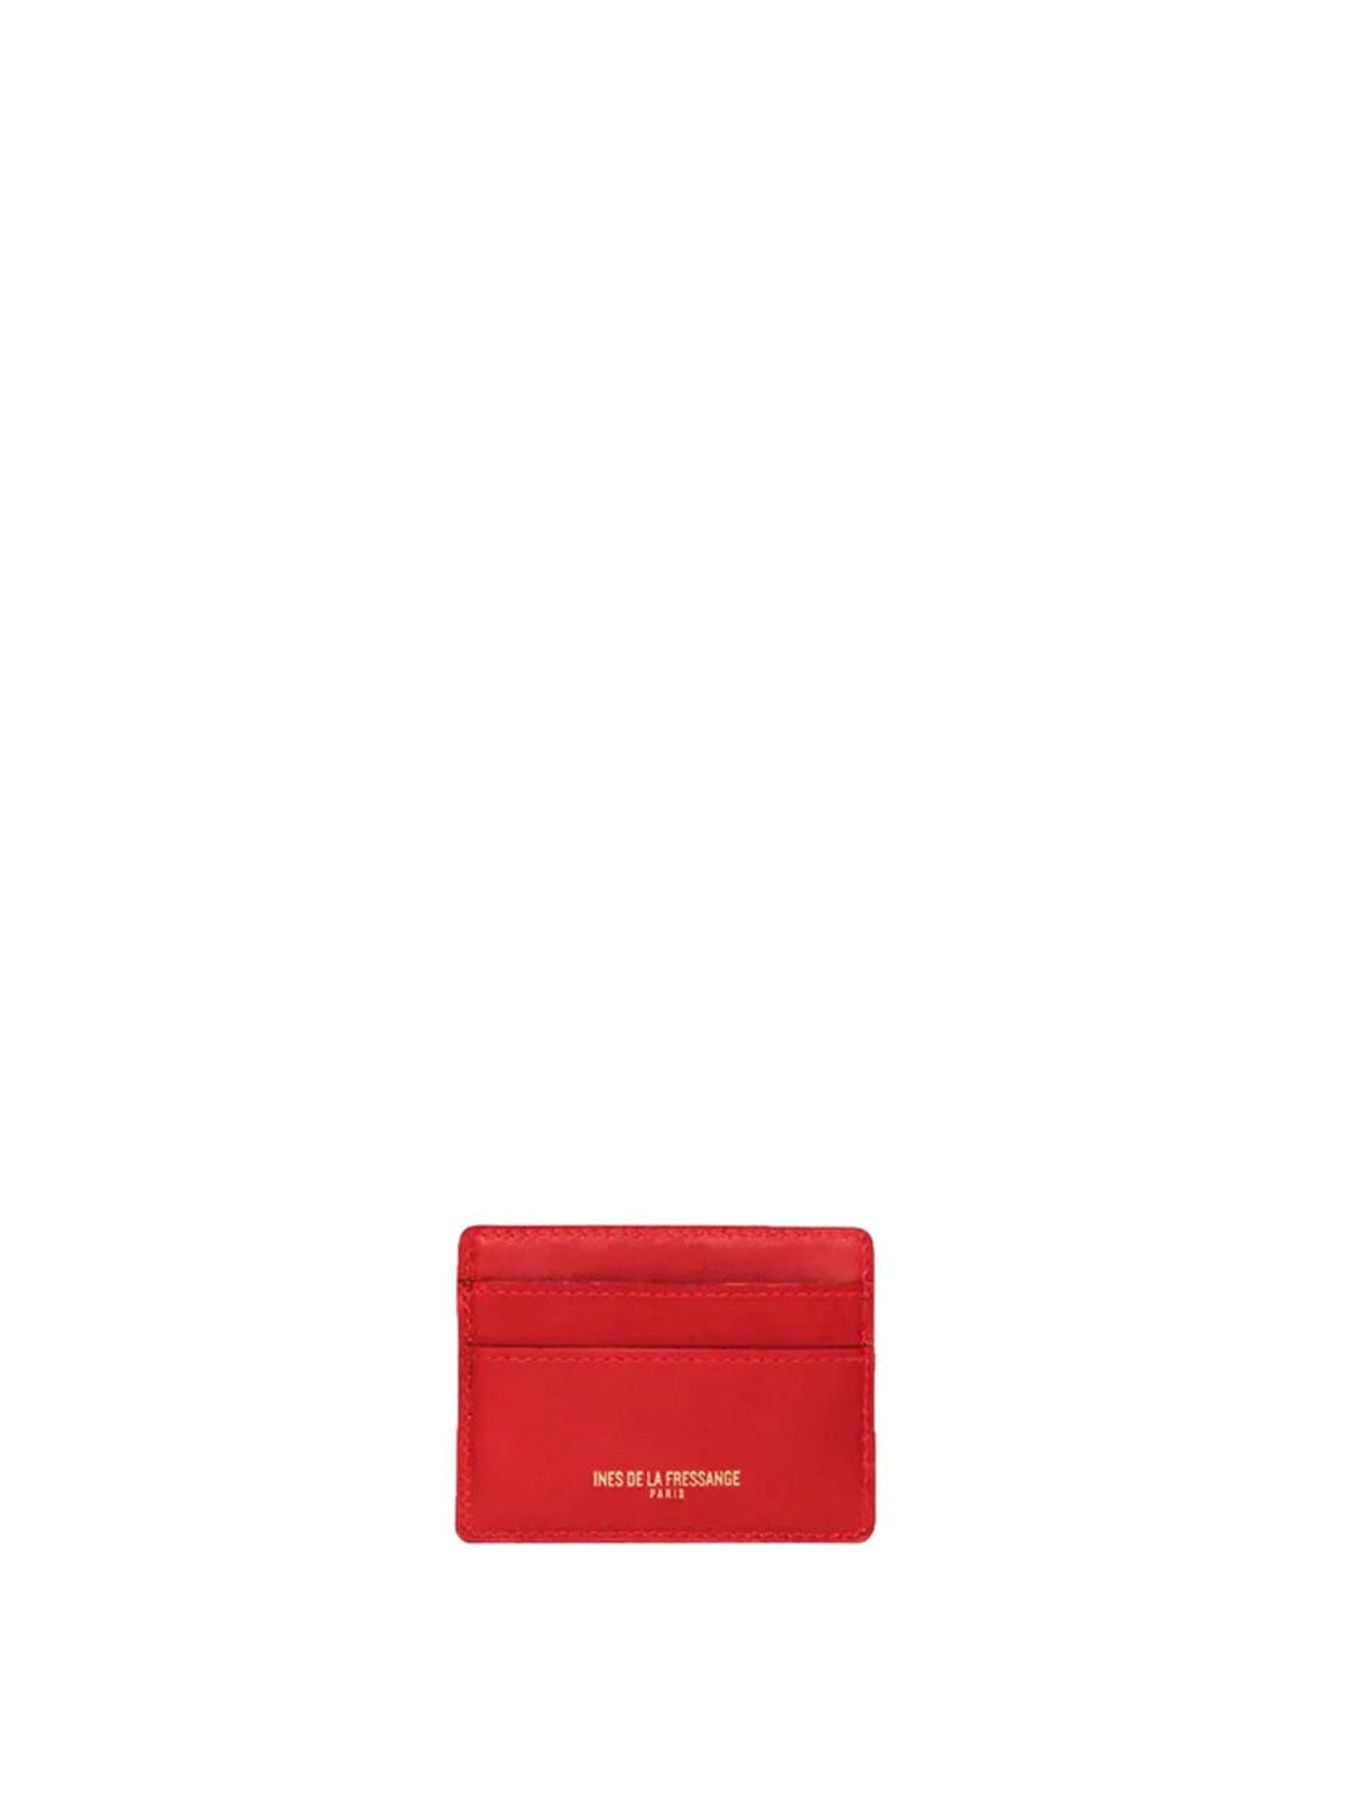 cardholder-marcia-leather-red